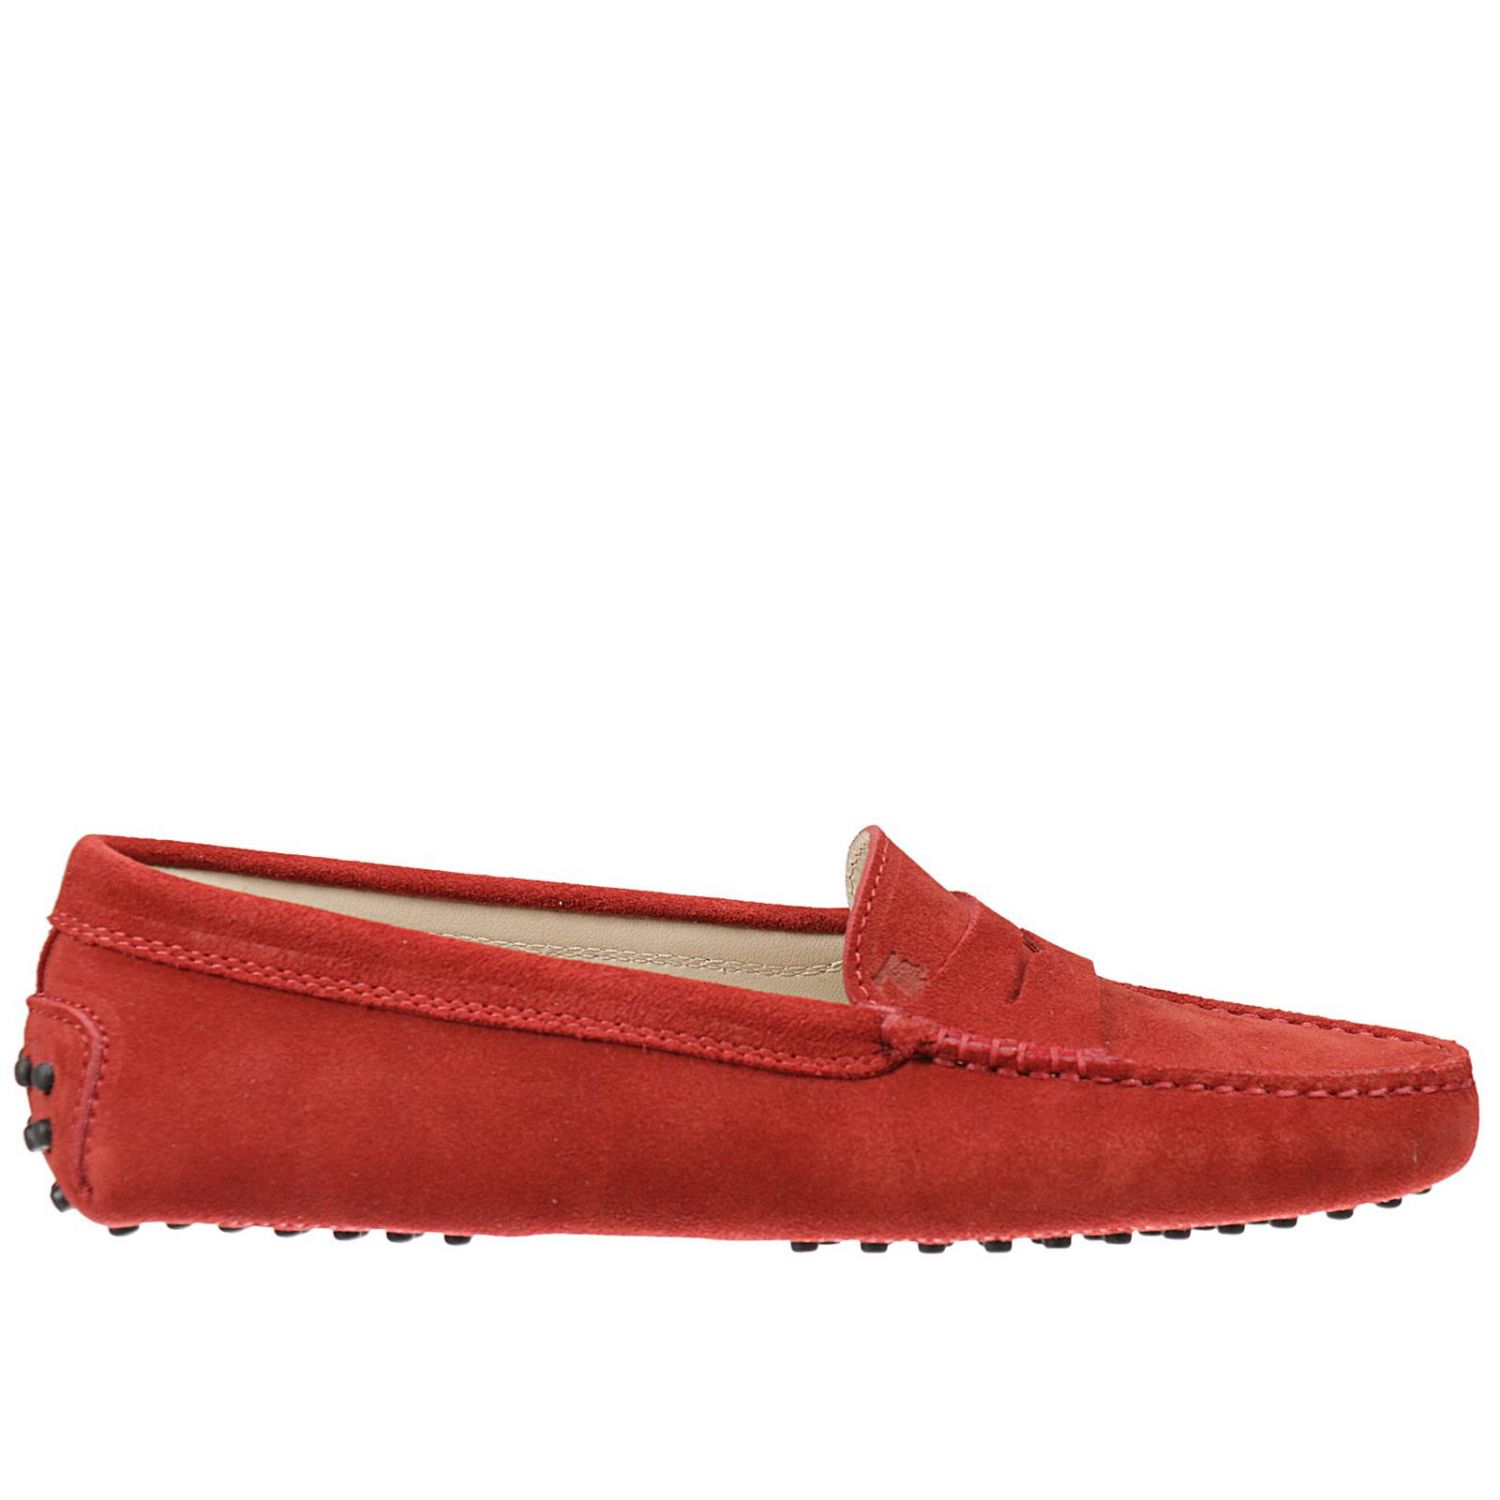 TODS: LOAFER GOMMINO SUEDE | Flat Shoes Tods Women Red | Flat Shoes ...